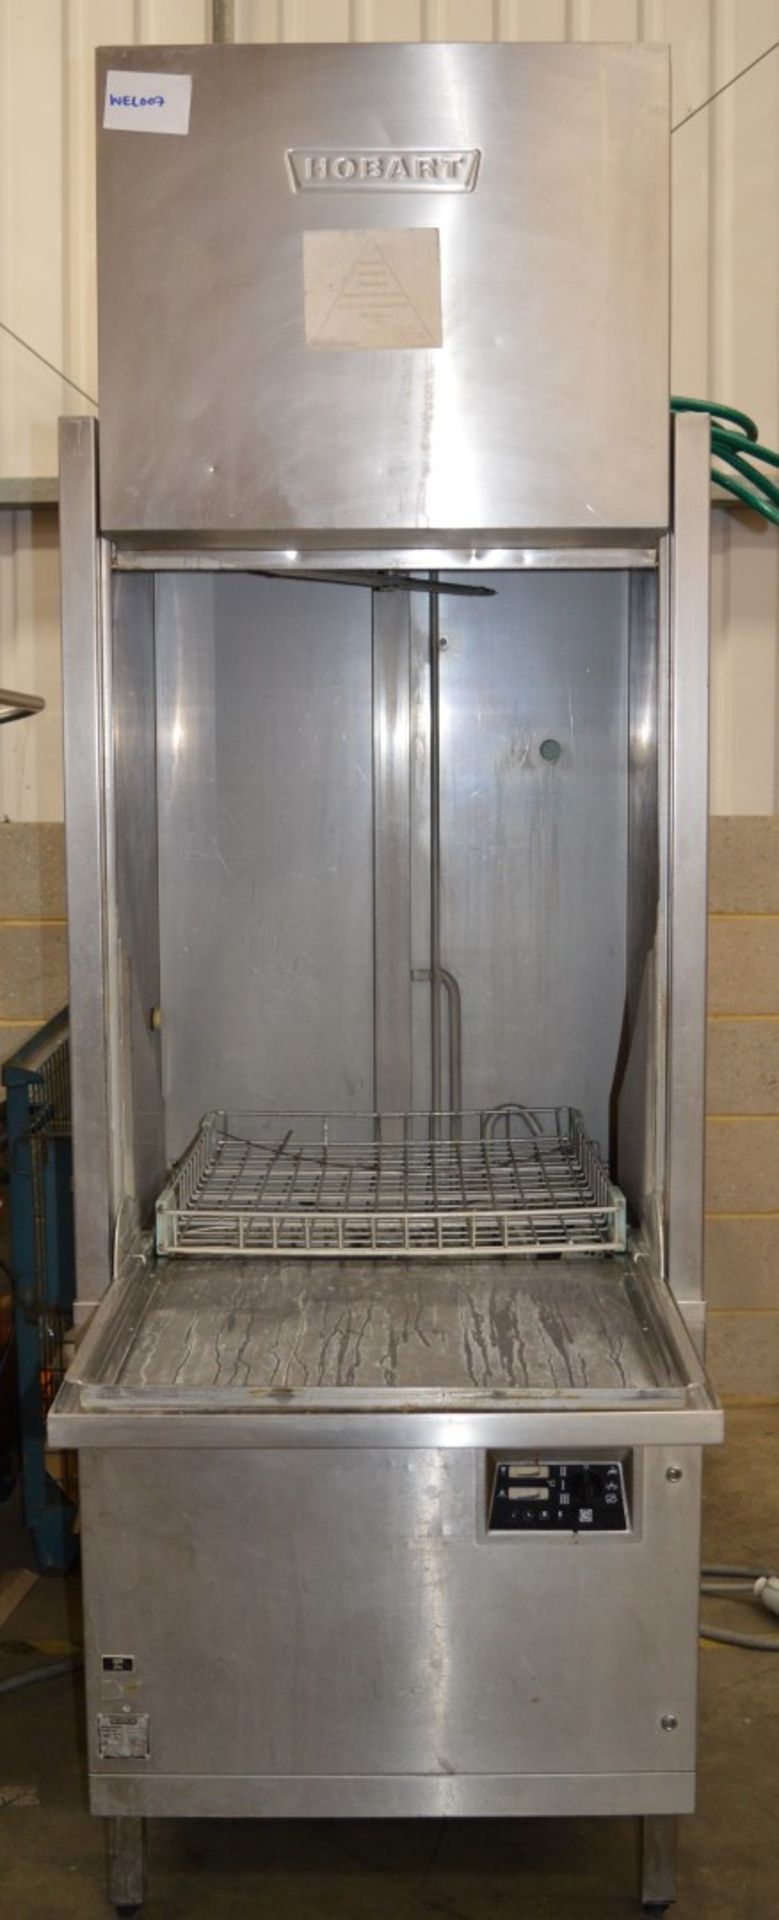 1 x Hobart UX30B Passthrough Dish Washer - Stainless Steel Commercial Catering Equipment - CL057 - - Image 5 of 6